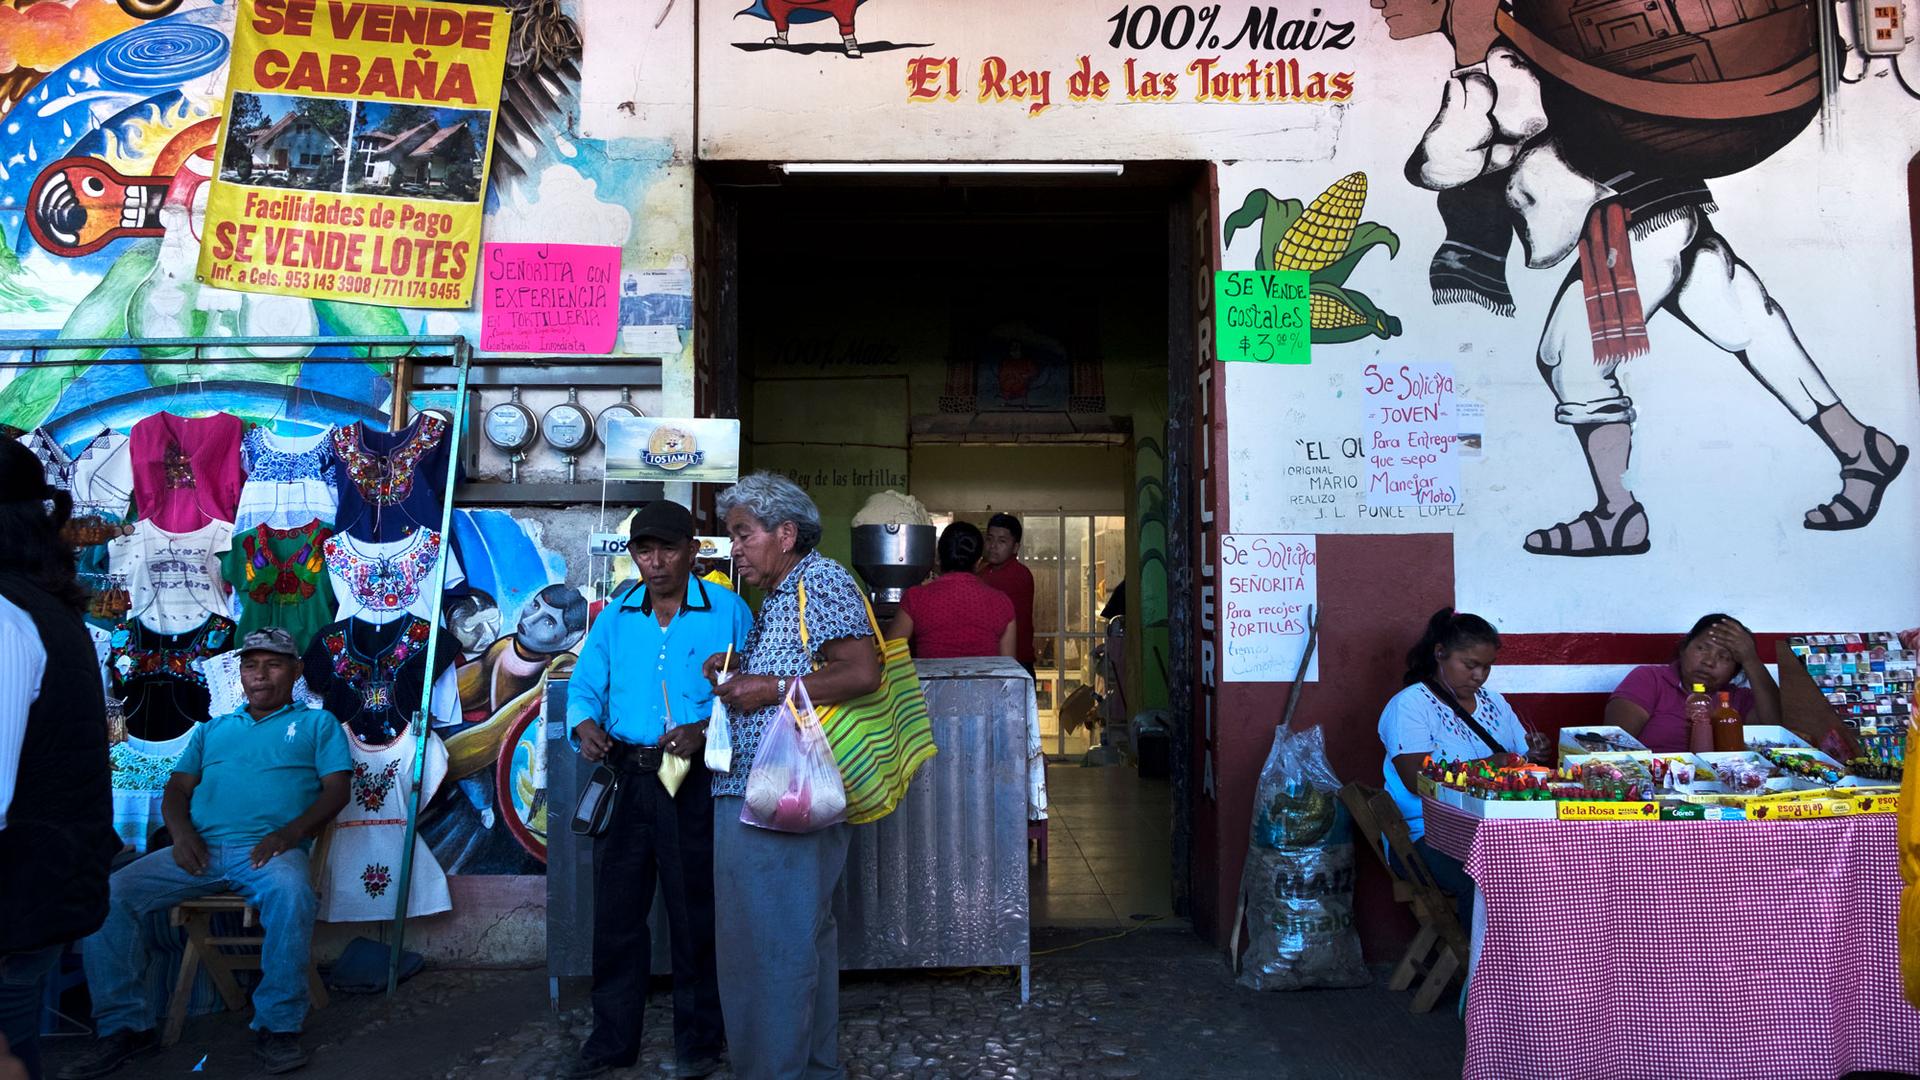 A market is shown in Tlaxiaco, Mexico, with vendors and shoppers.